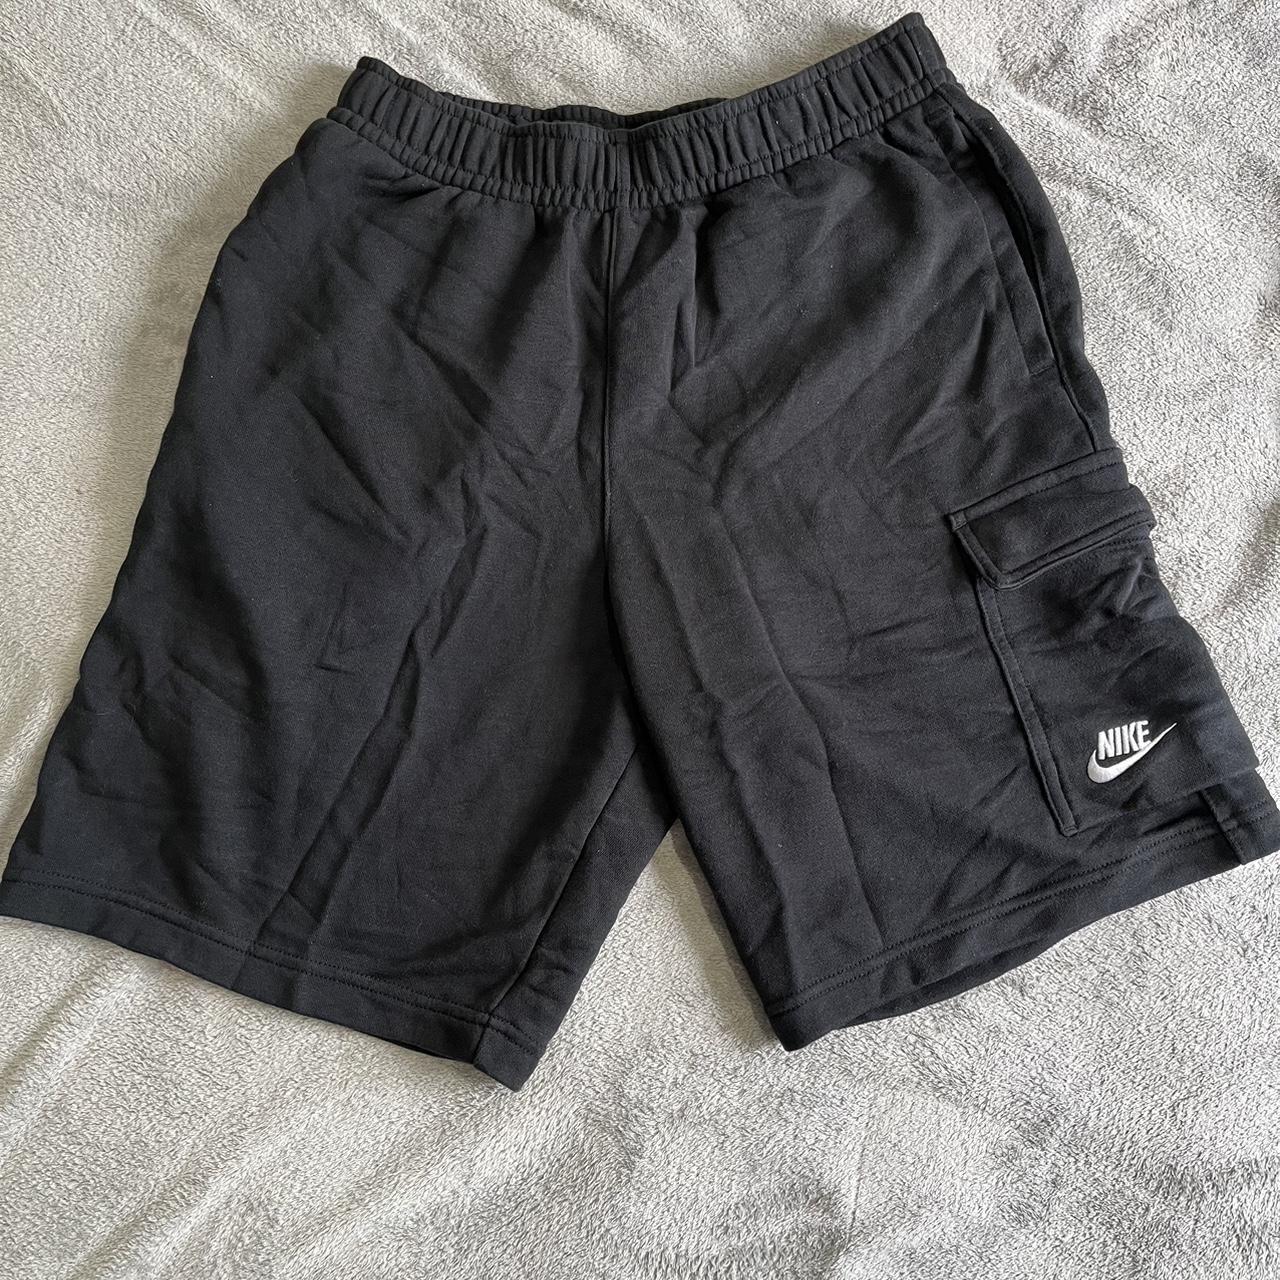 Nike Fleece Cargo Shorts Size Small One of the... - Depop